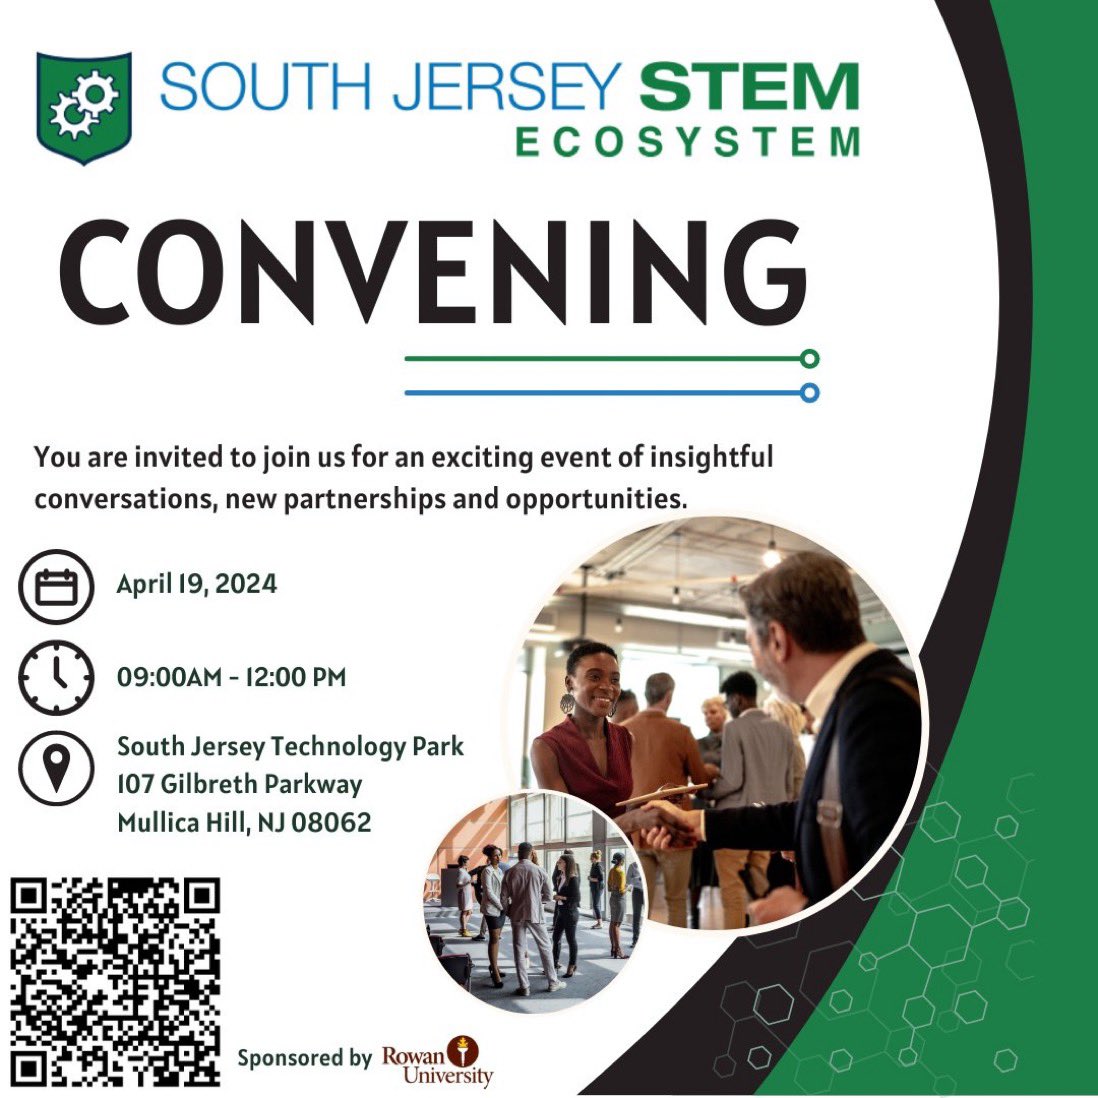 Hear Industry Trends, Career Pathways for emerging fields, updates on  AI, broadening STEM participation, #apprenticeships Join us on April 19 for a dynamic event! Register now:
#STEM #SouthJersey #CareerPathways #AI #IndustryInsights #STEMEducation
@NJPSA @NewJerseyDOE @NJEA